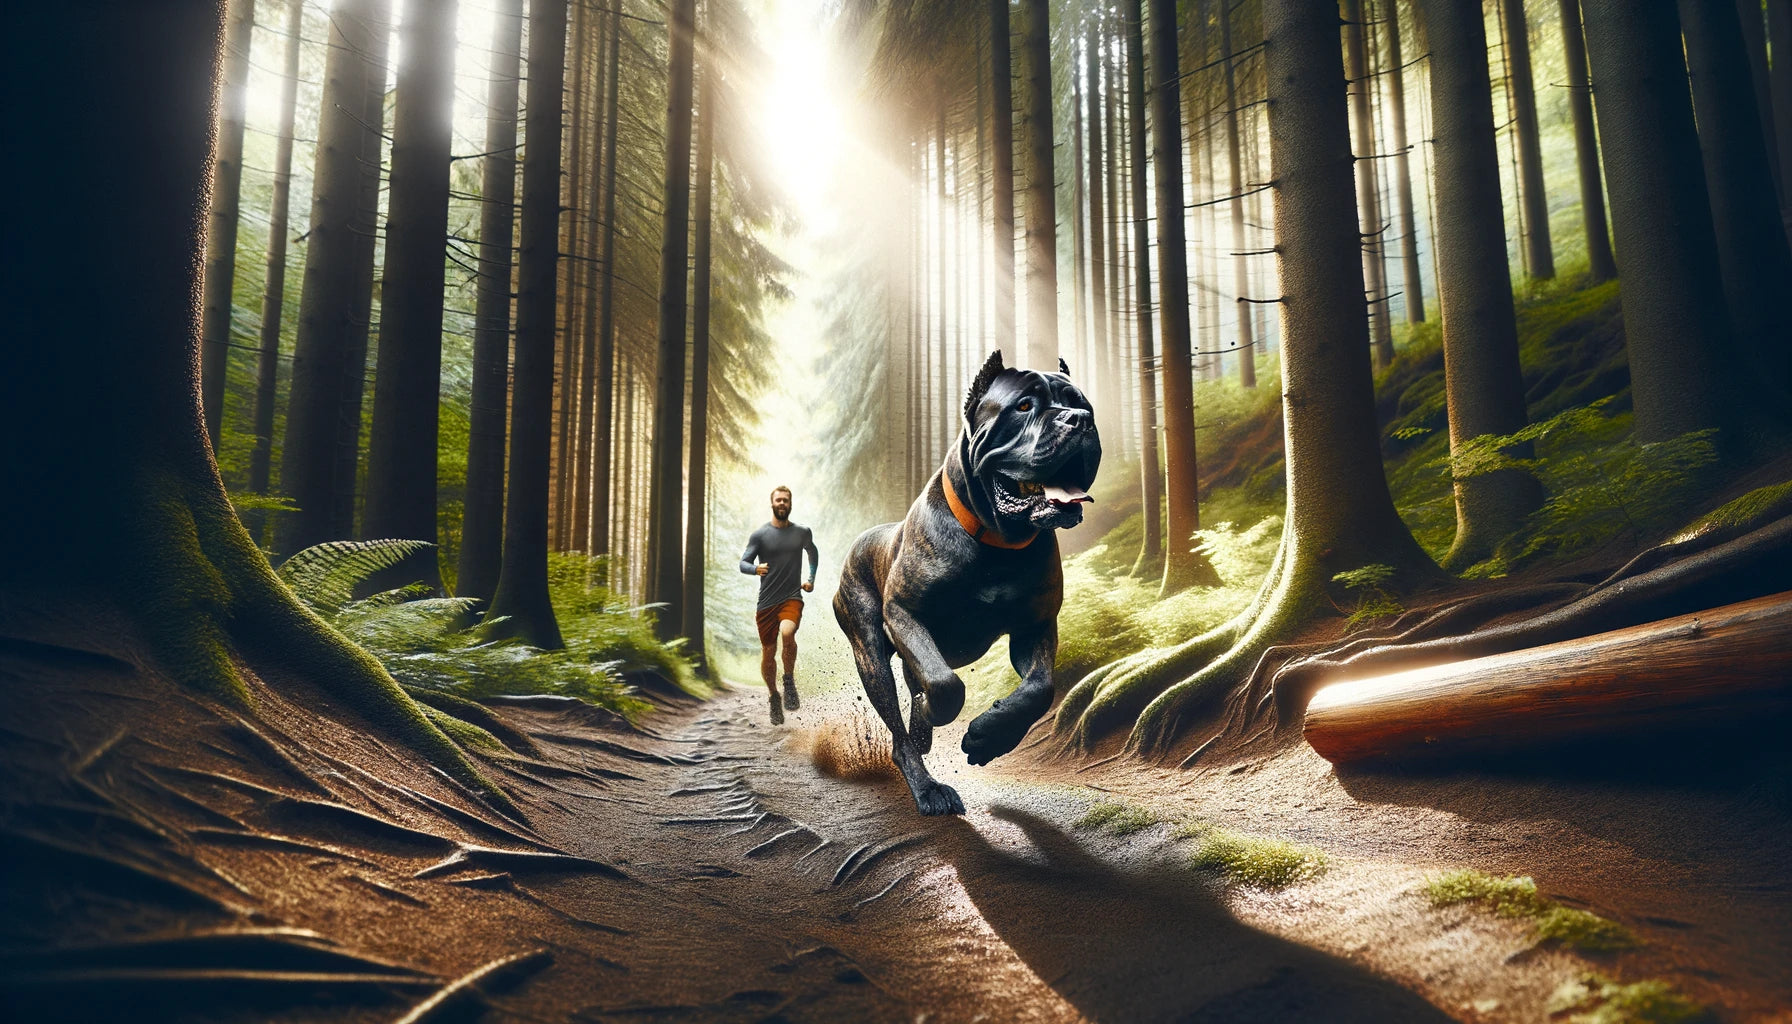 Cane Corso trail running with its owner through a forested path.